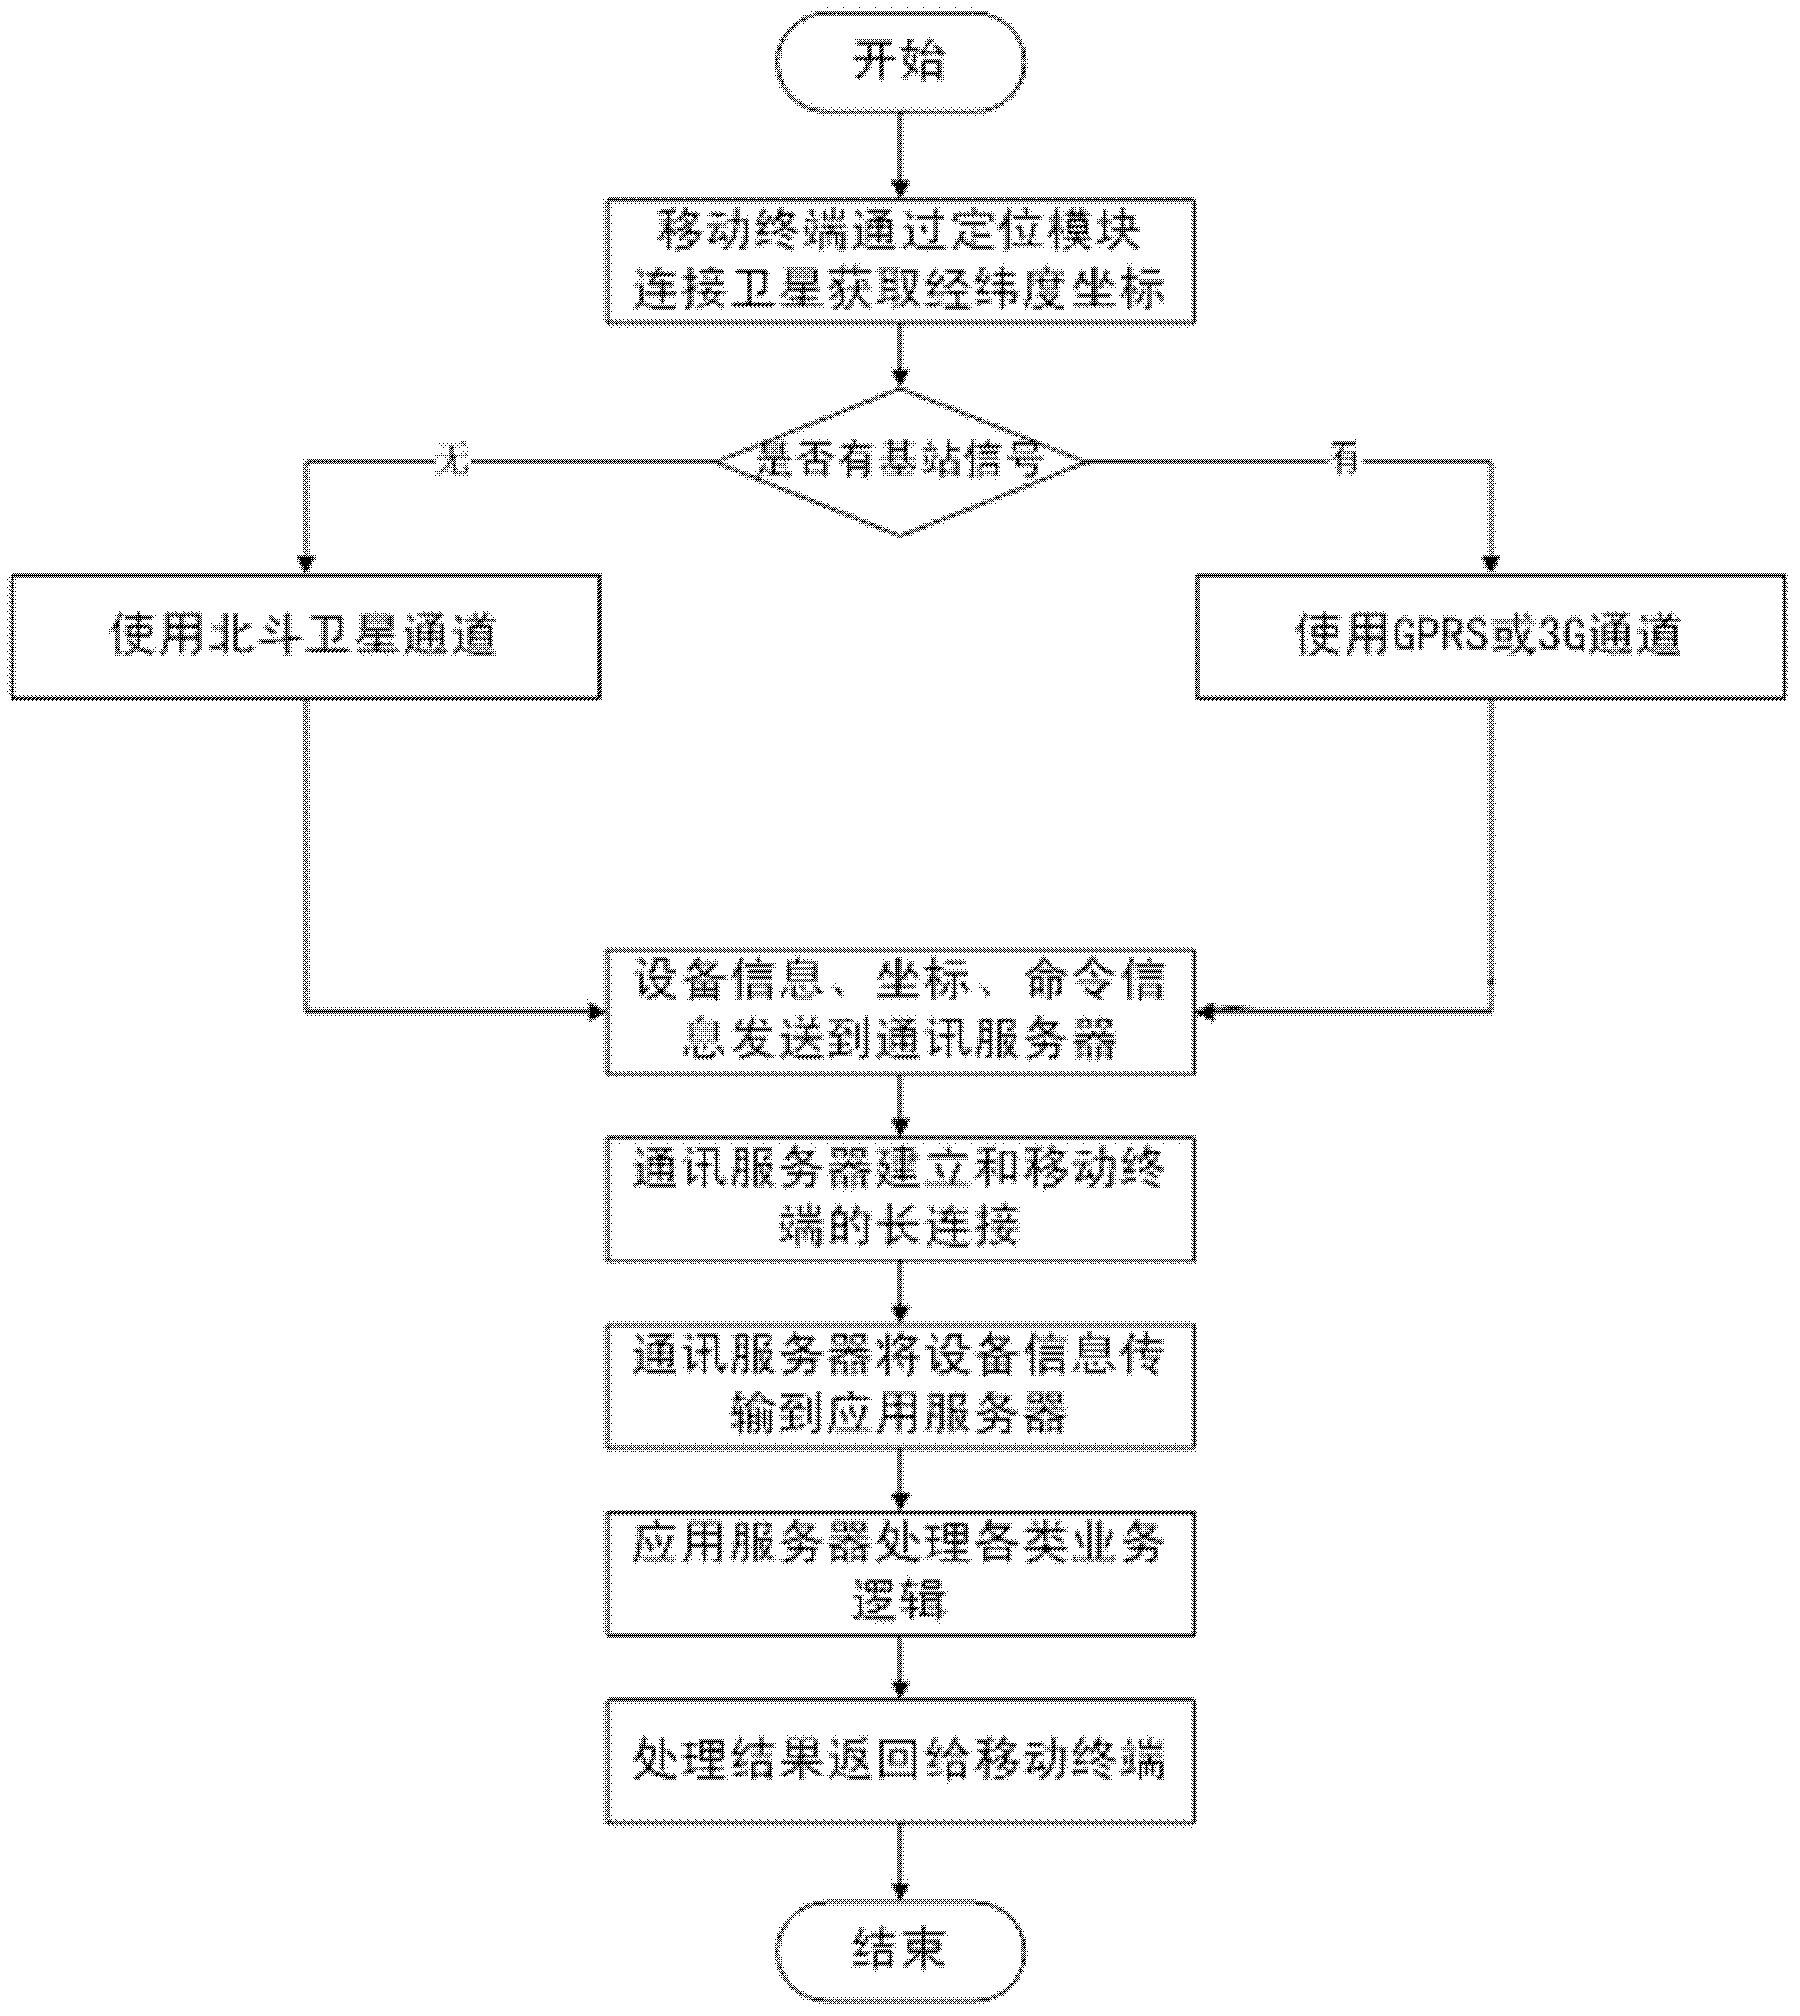 Tour guide and safety control method based on satellite equipment